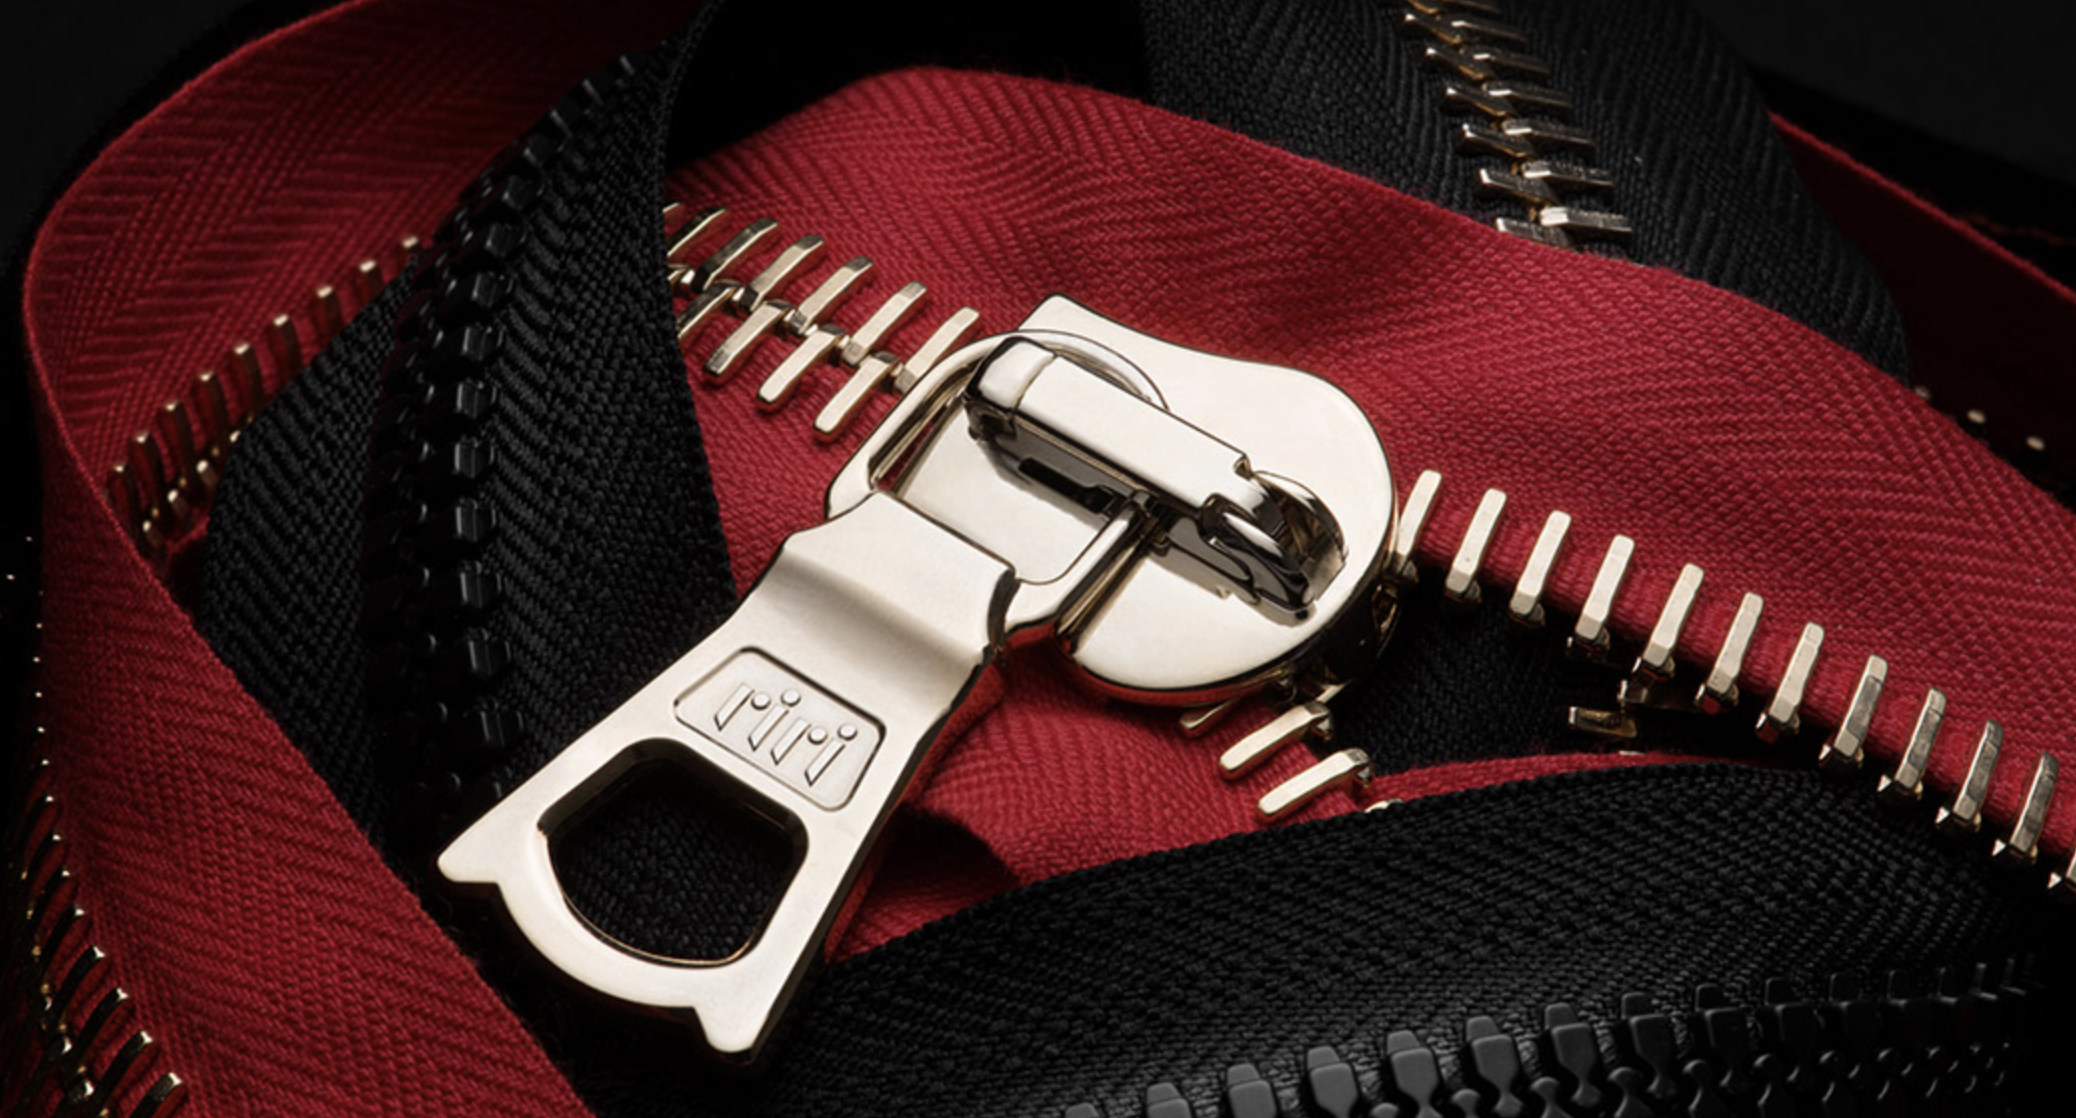 YKK Excella - Zipper Accessories (Made in Japan)